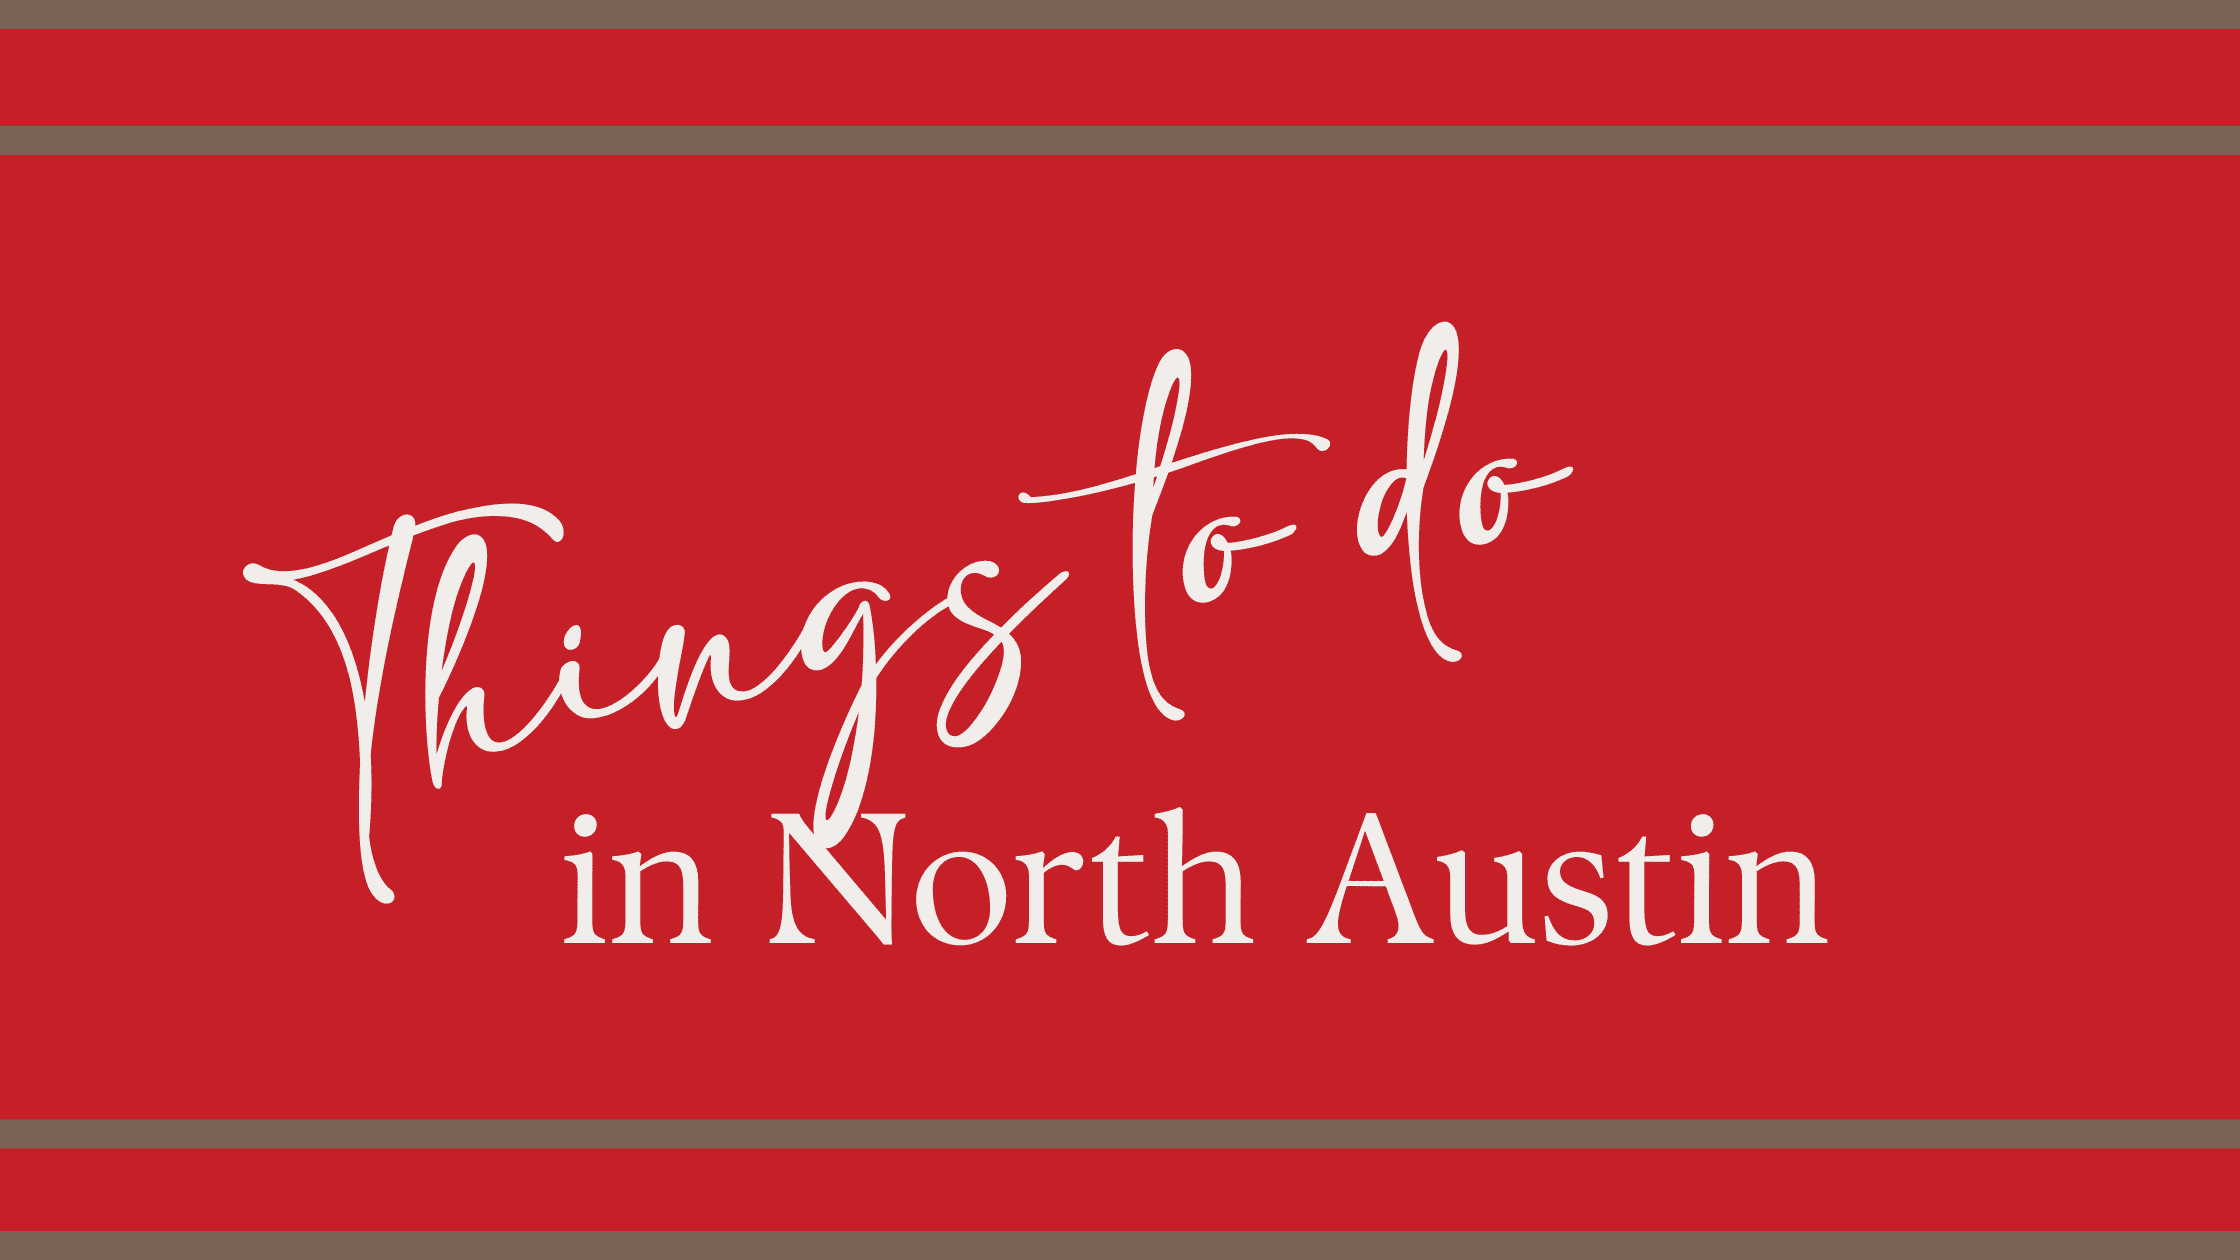 Things to do in North Austin